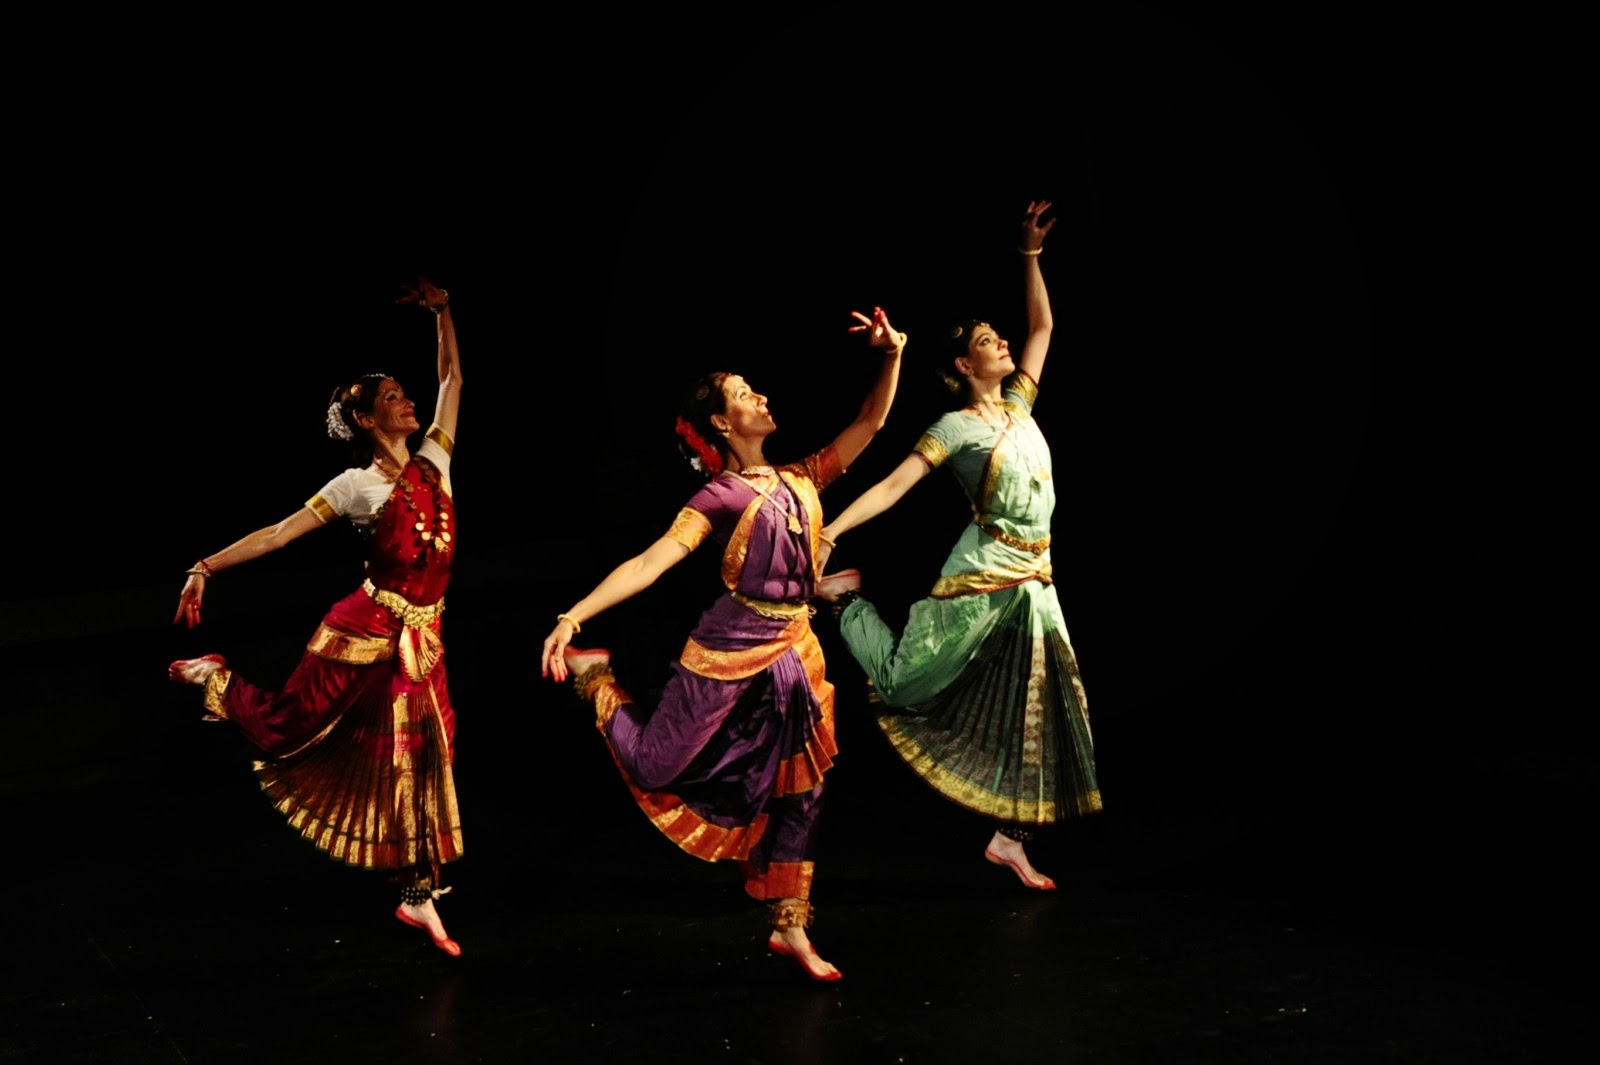 GAALC school of dance offers certificate level 
				training programs for learning Indian classical dance forms including Kathak, Indian folk dancing styles and global / western dance styles 
				through online dancing lessons conducted by highly qualified dance instructors and experienced trainers, a faculty of 
				professional dance teachers – the Indian classical dance Guru.